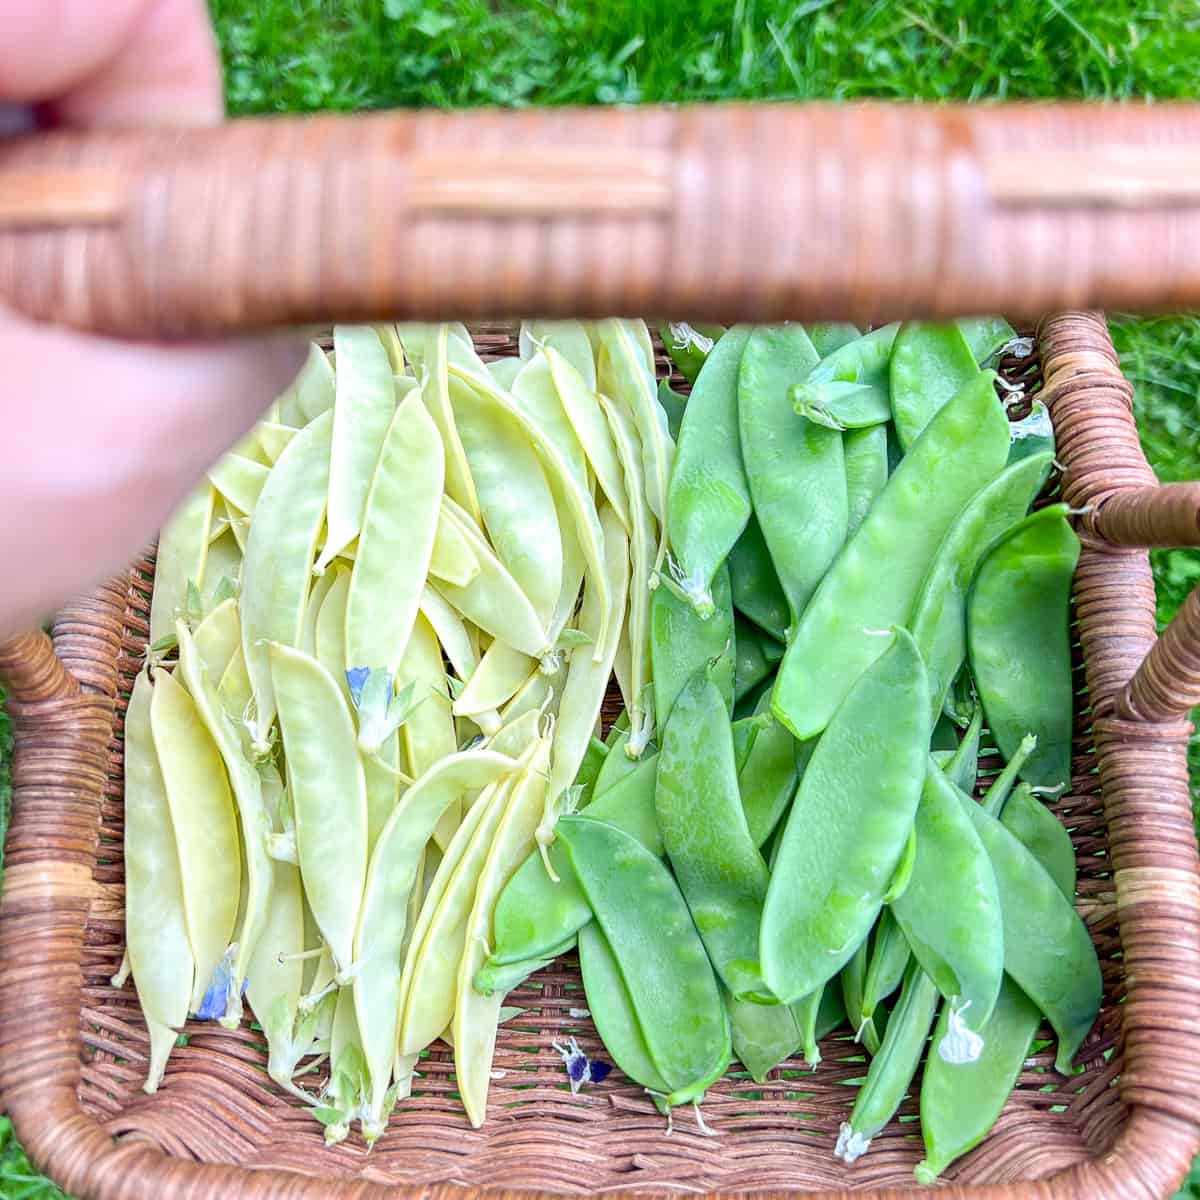 A best full of freshly picked snow peas, golden and green.